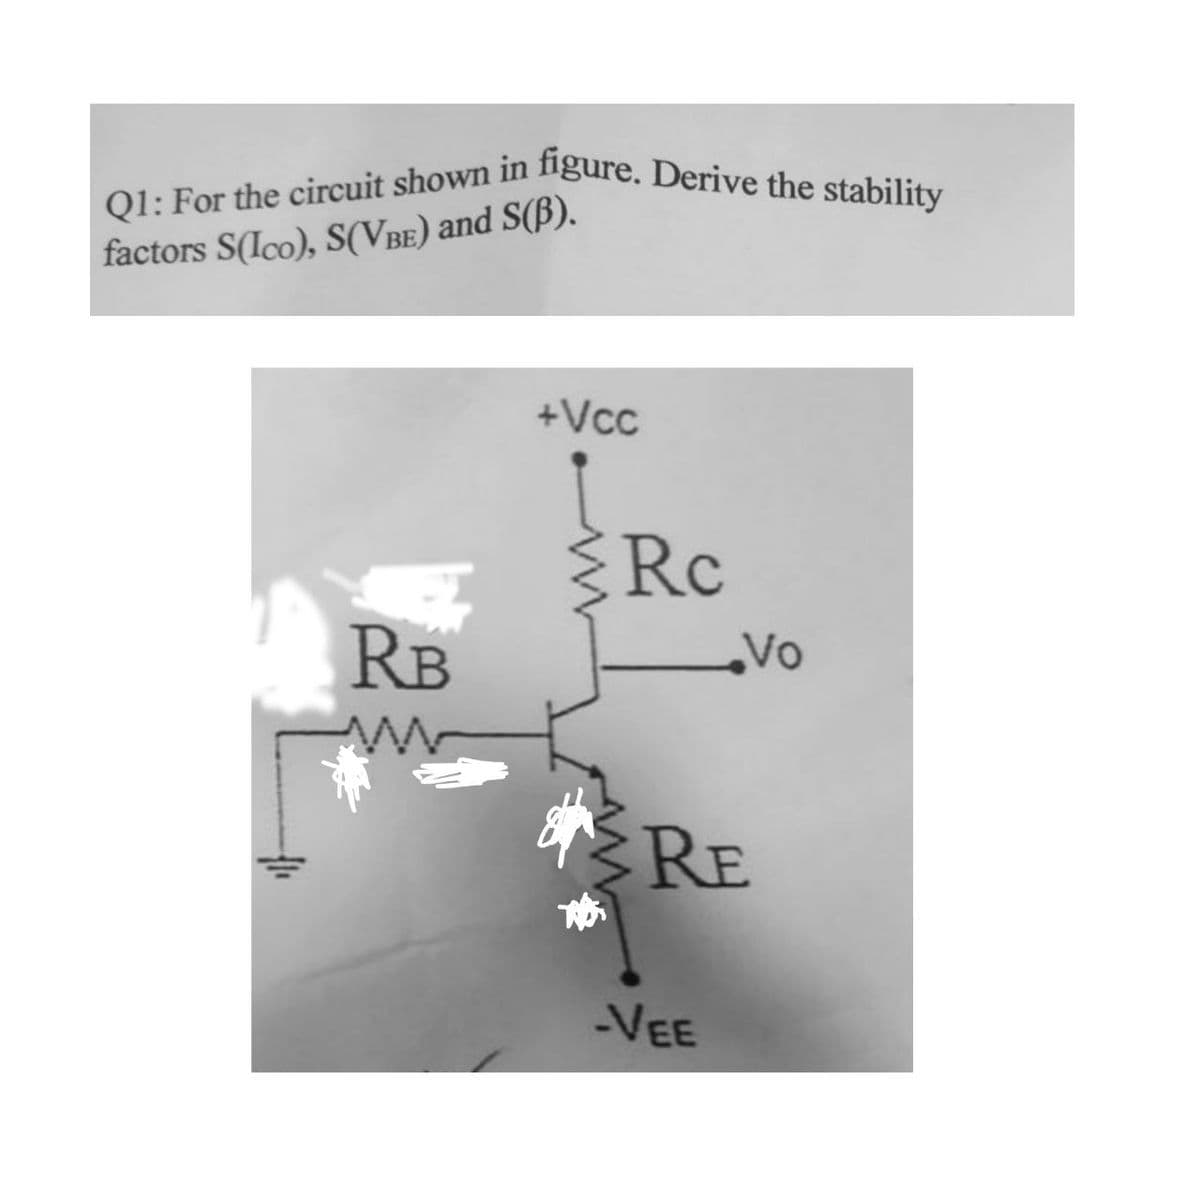 Q1: For the circuit shown in figure. Derive the stability
factors S(Ico), S(VBE) and S(ß).
RB
www
+Vcc
Rc
Vo
RE
-VEE